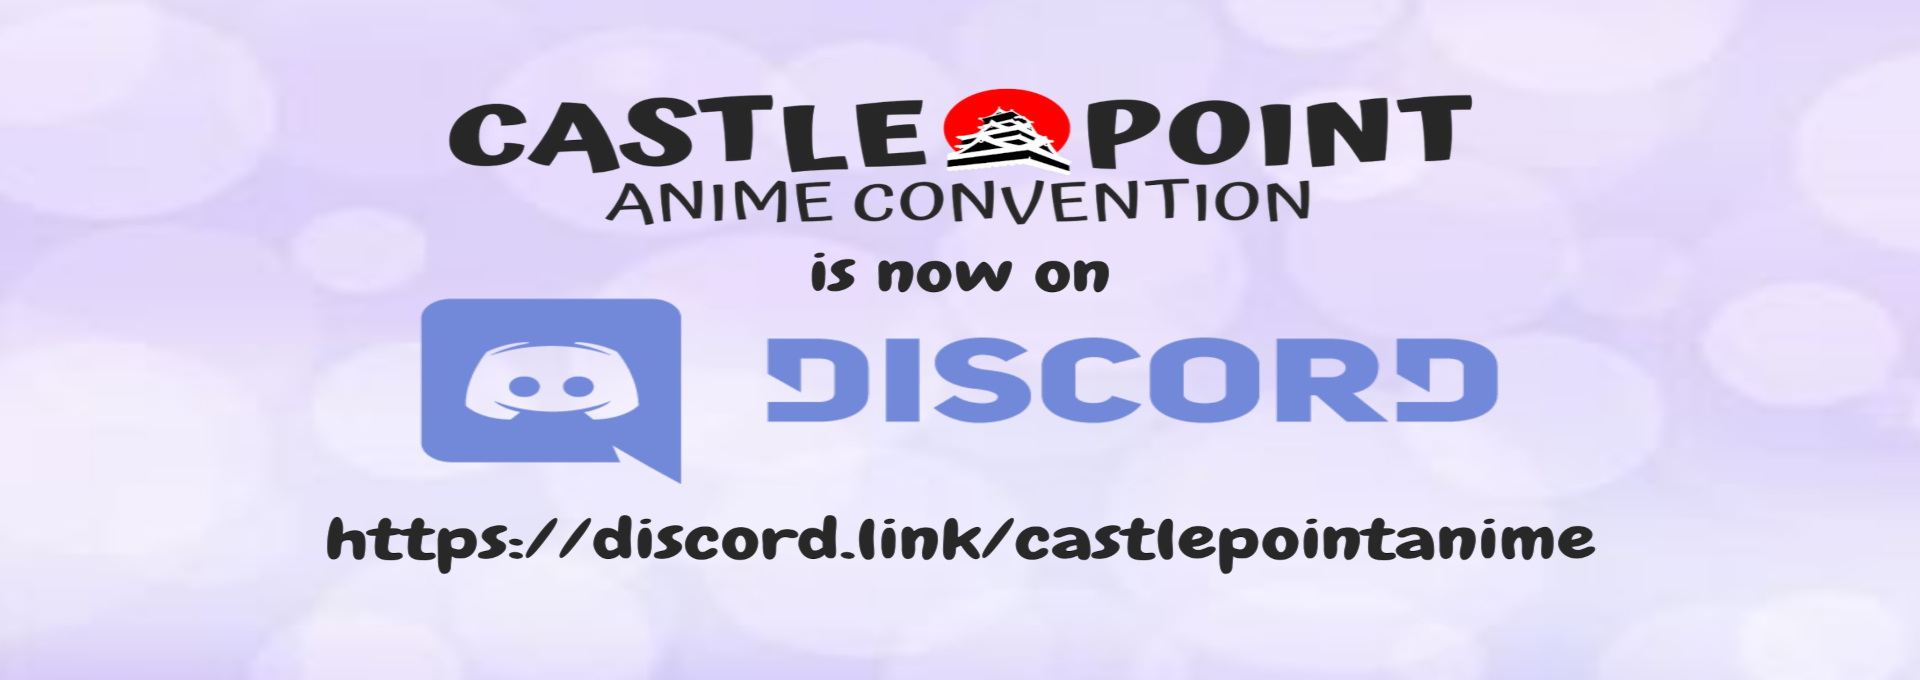 Castle Point Anime Convention - Wikipedia